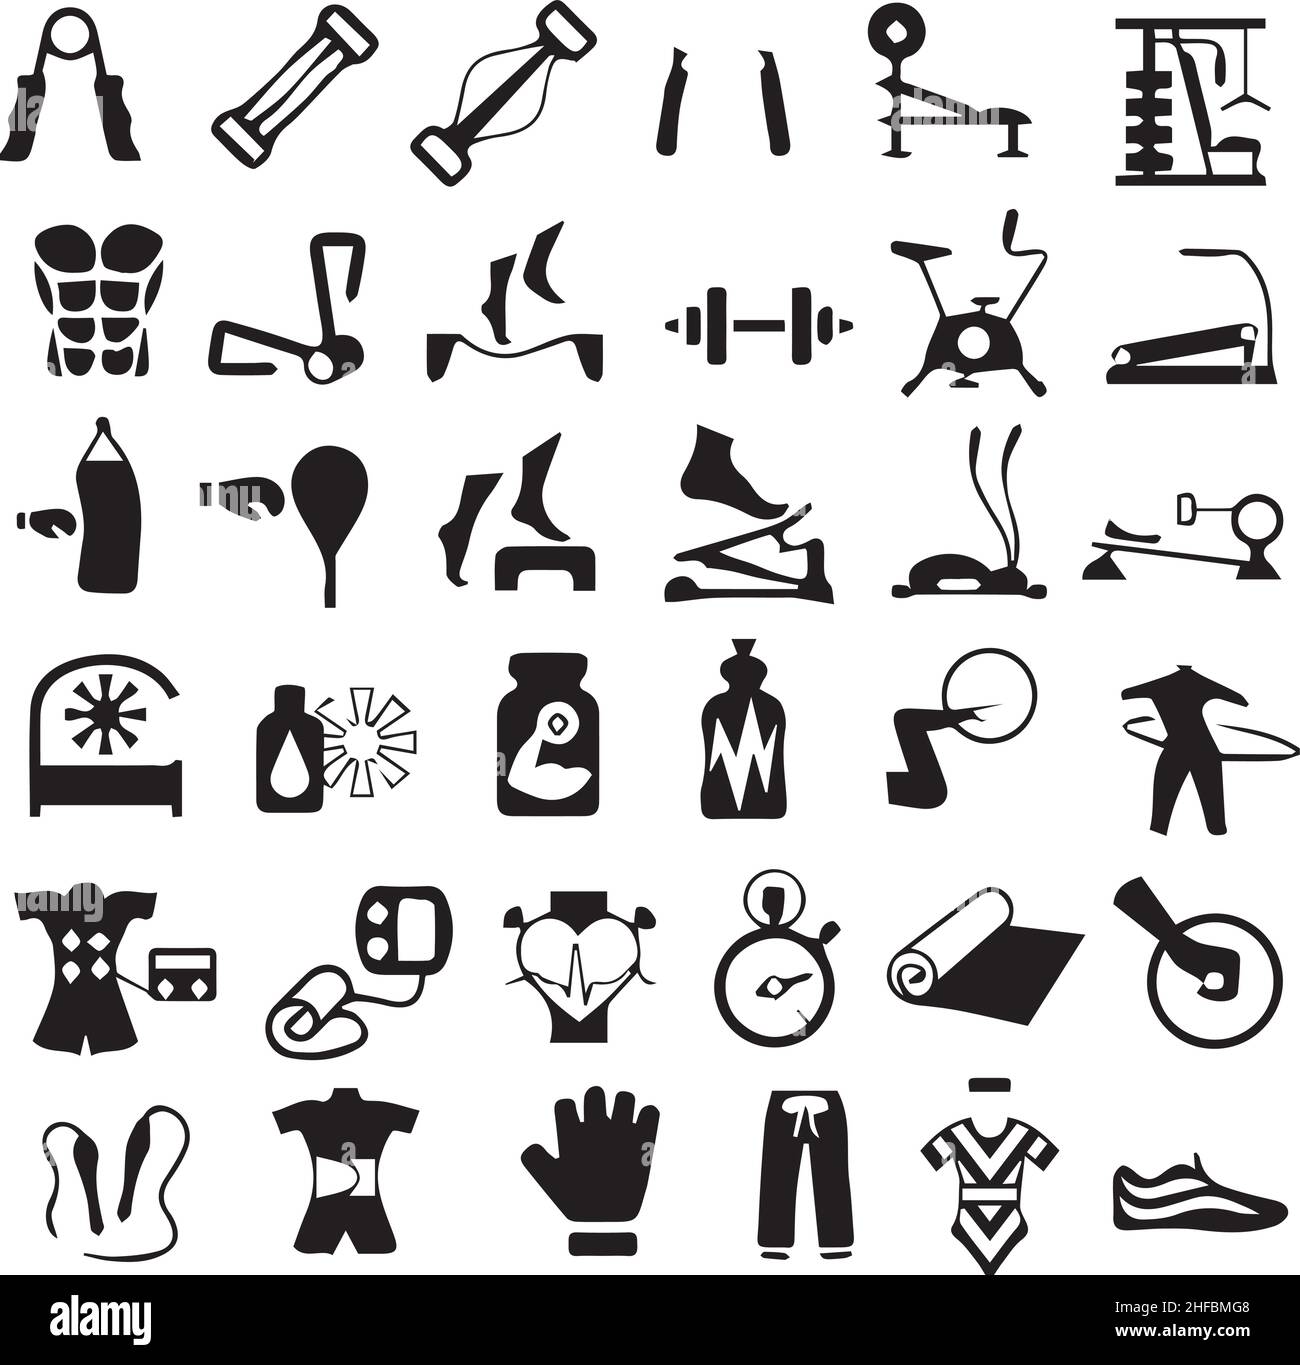 Exercise, Gym and Fitness Equipment Icons Stock Vector